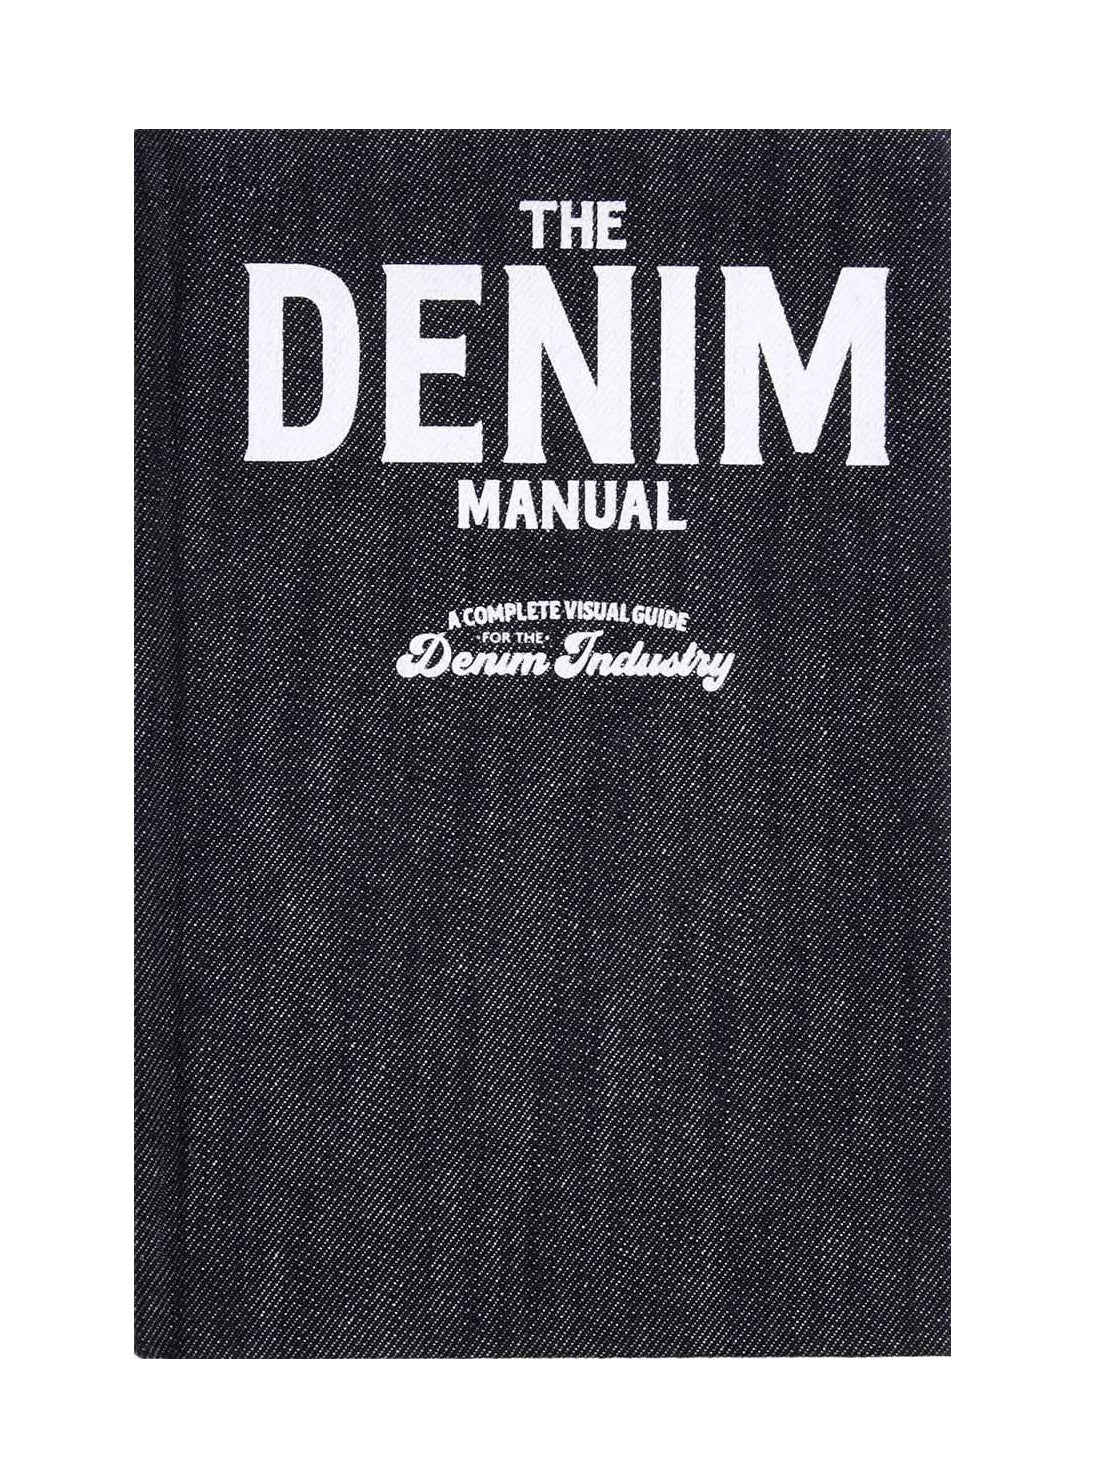 The Denim Manual. A complete visual guide for the denim industry.